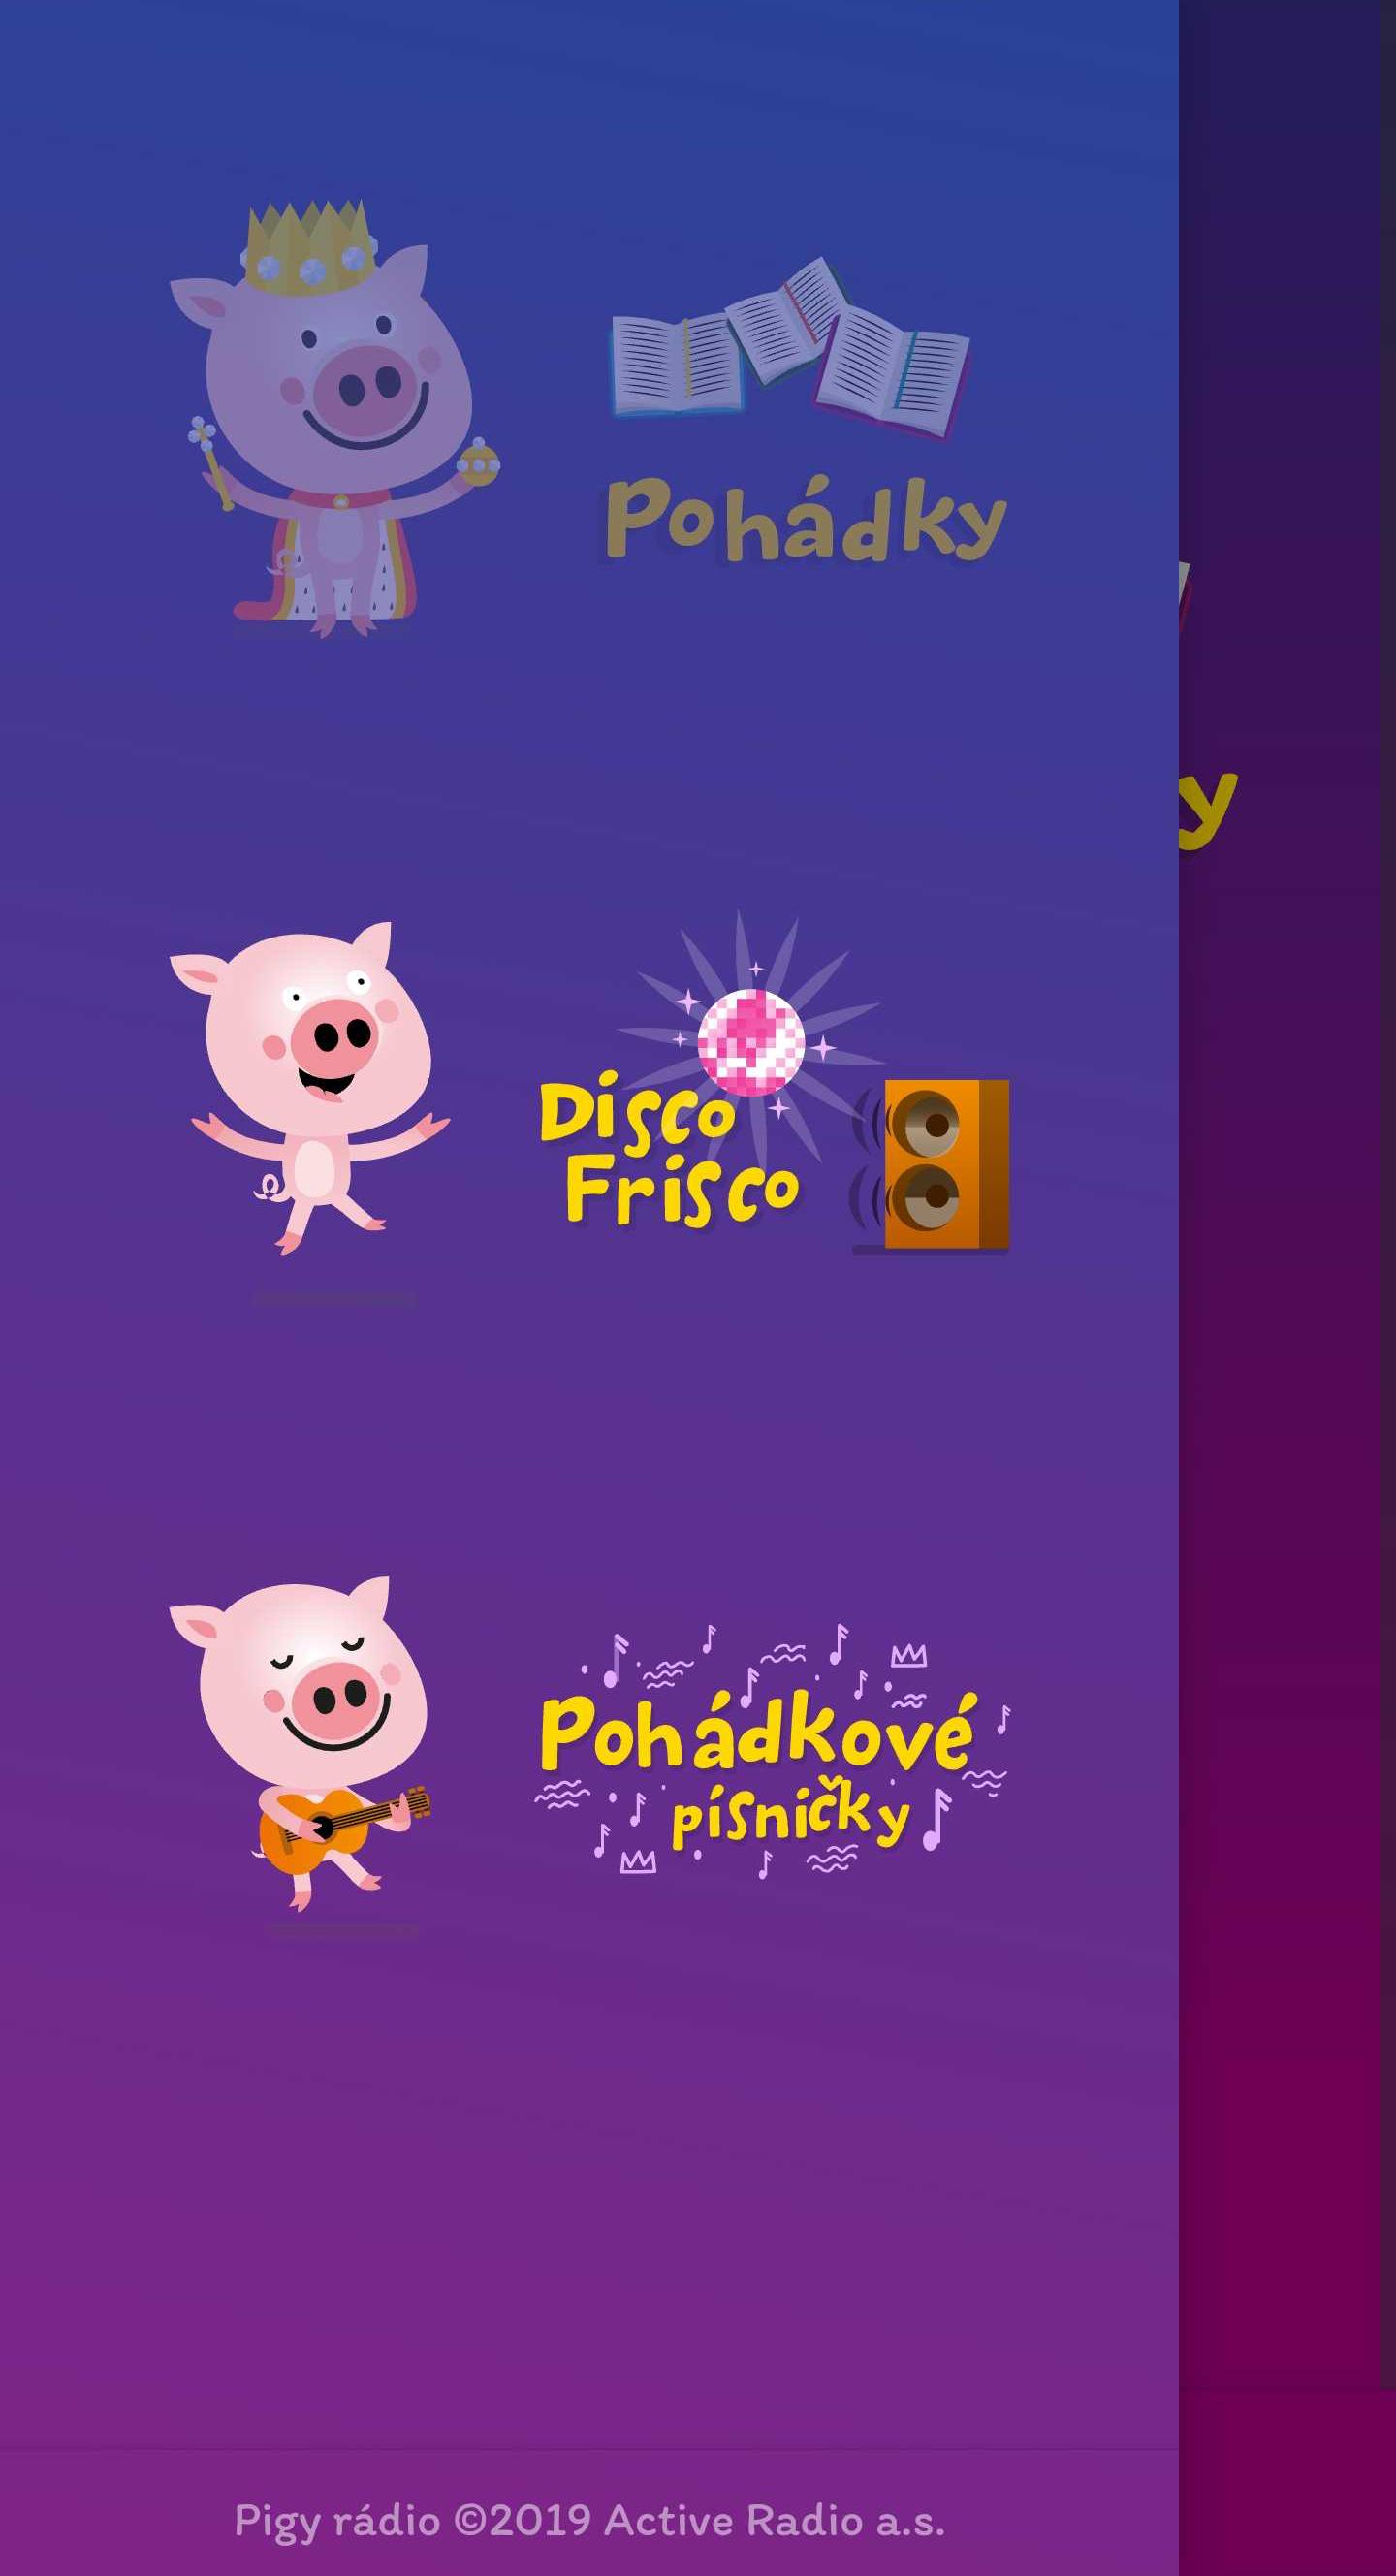 Pigy rádio for Android - APK Download